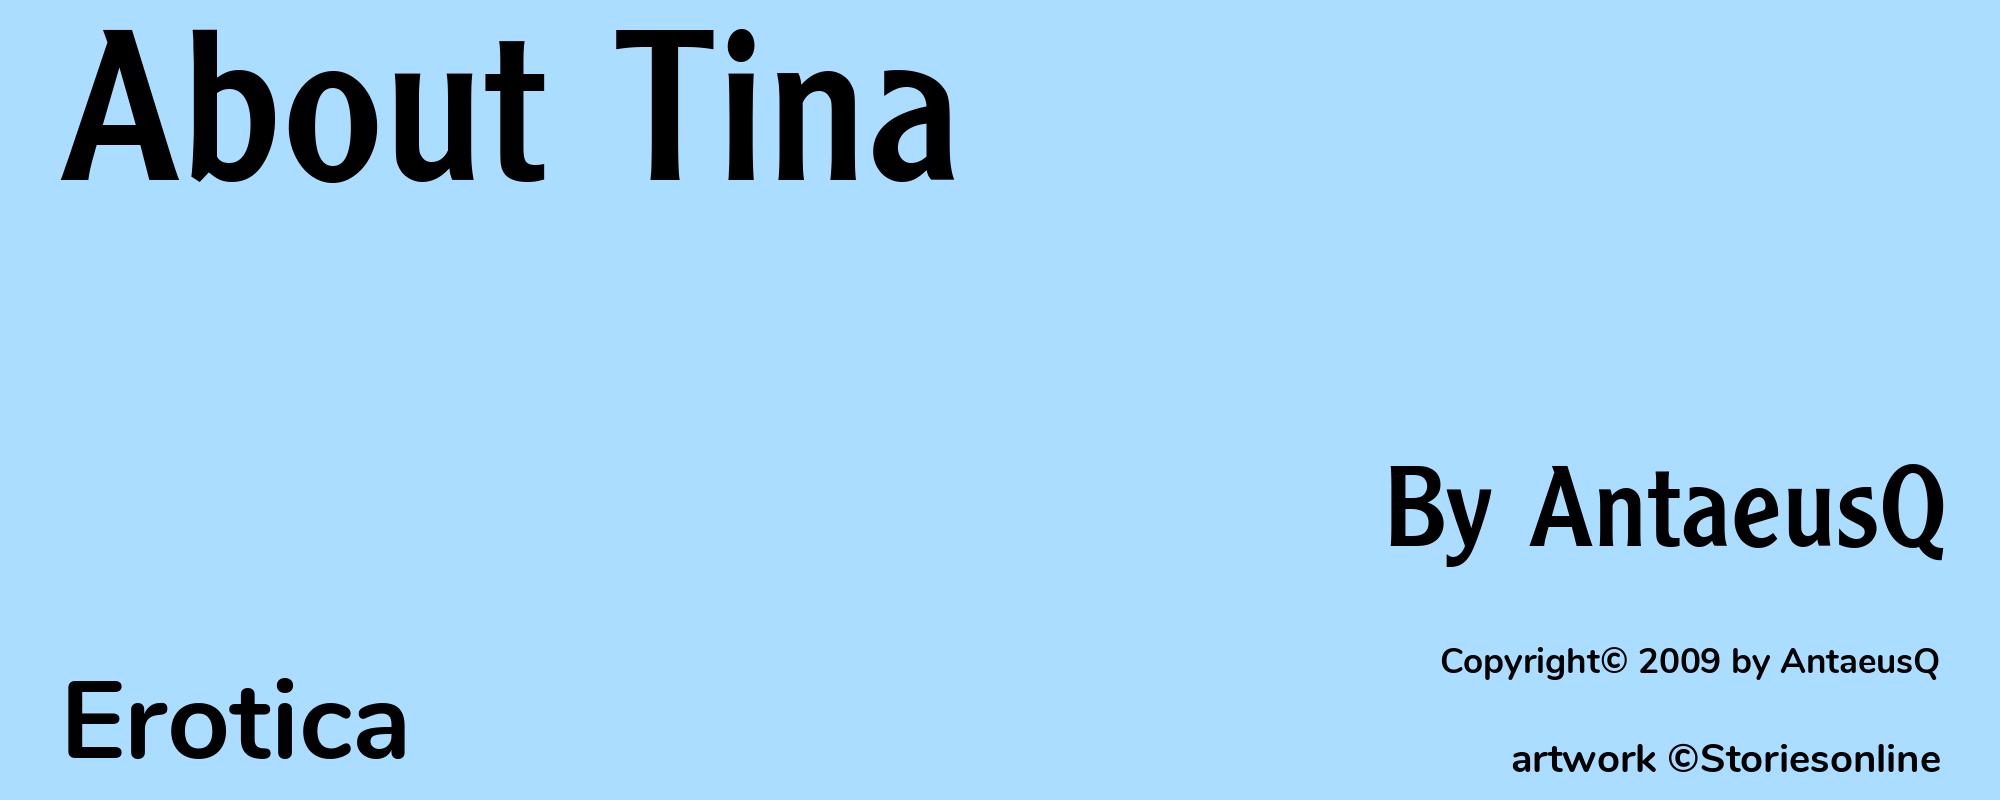 About Tina - Cover